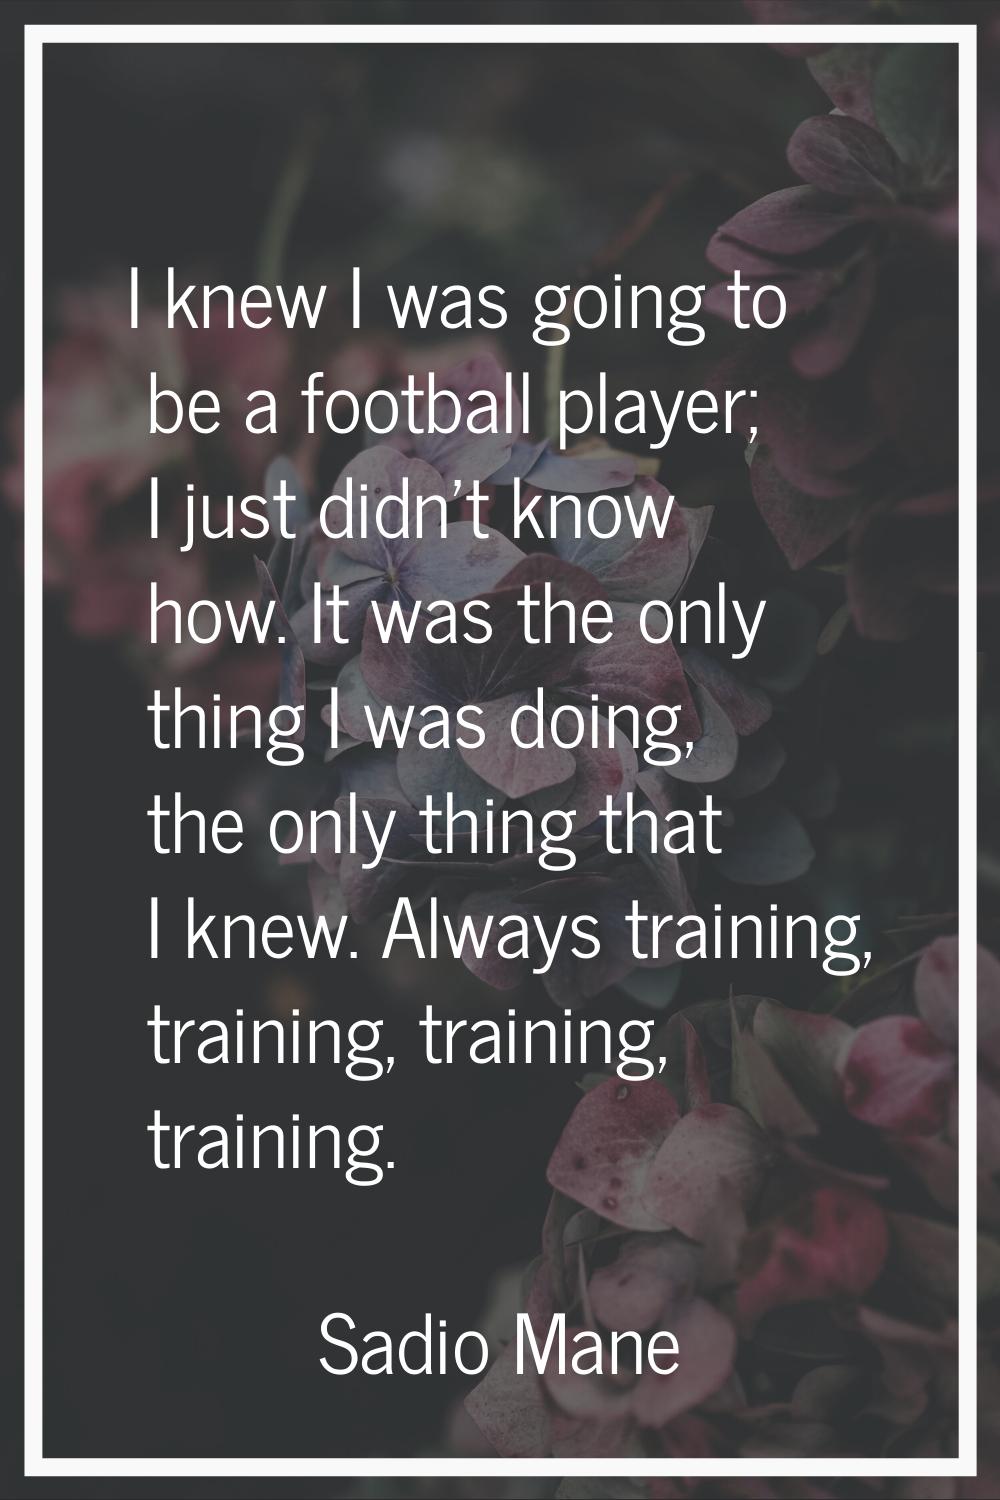 I knew I was going to be a football player; I just didn't know how. It was the only thing I was doi